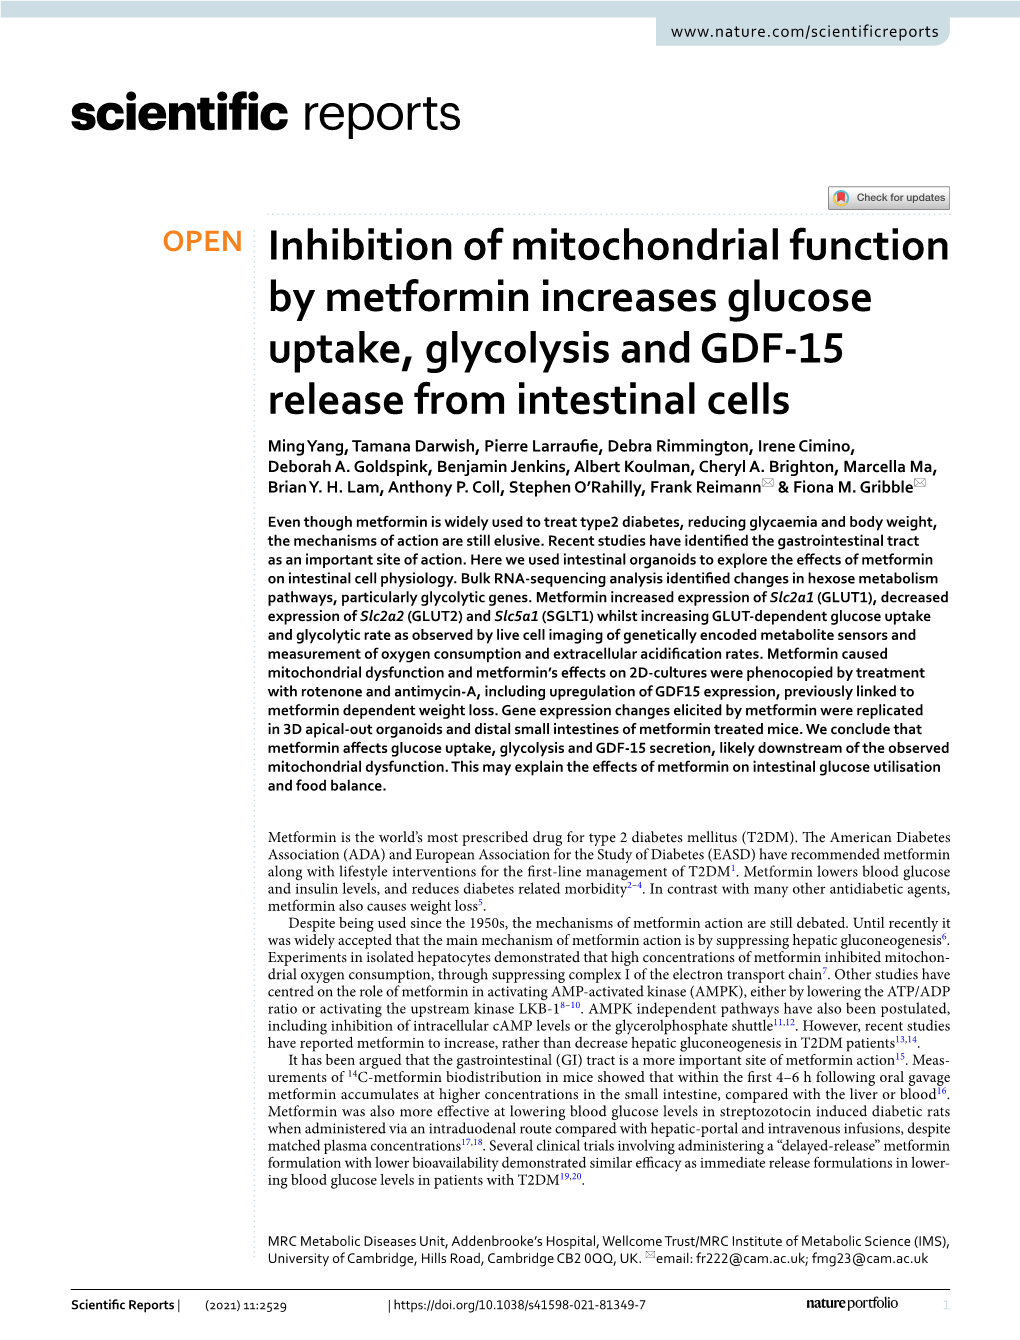 Inhibition of Mitochondrial Function by Metformin Increases Glucose